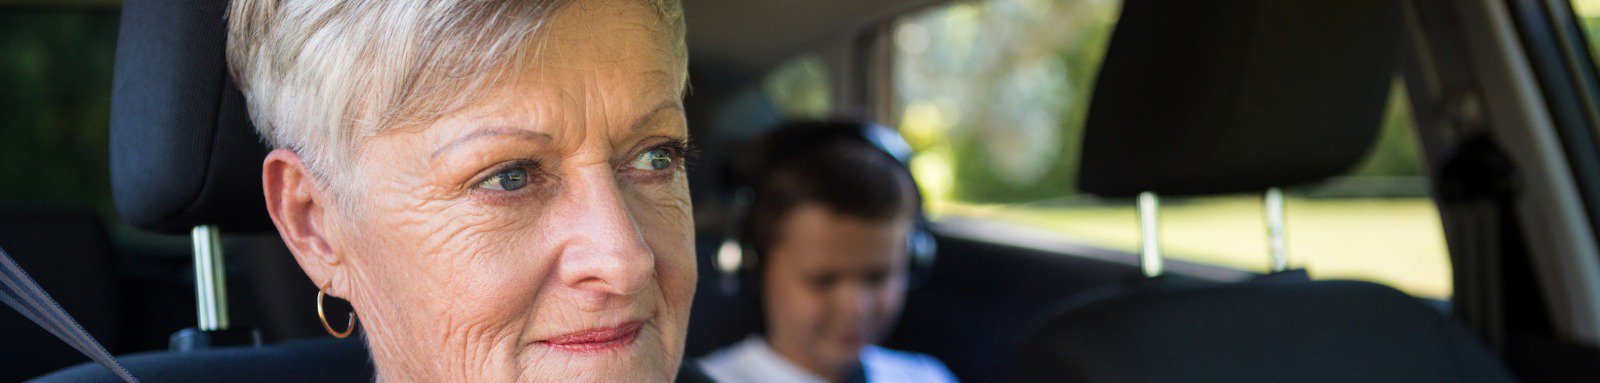 Mature woman driving looking ahead young boy backseat headphones in